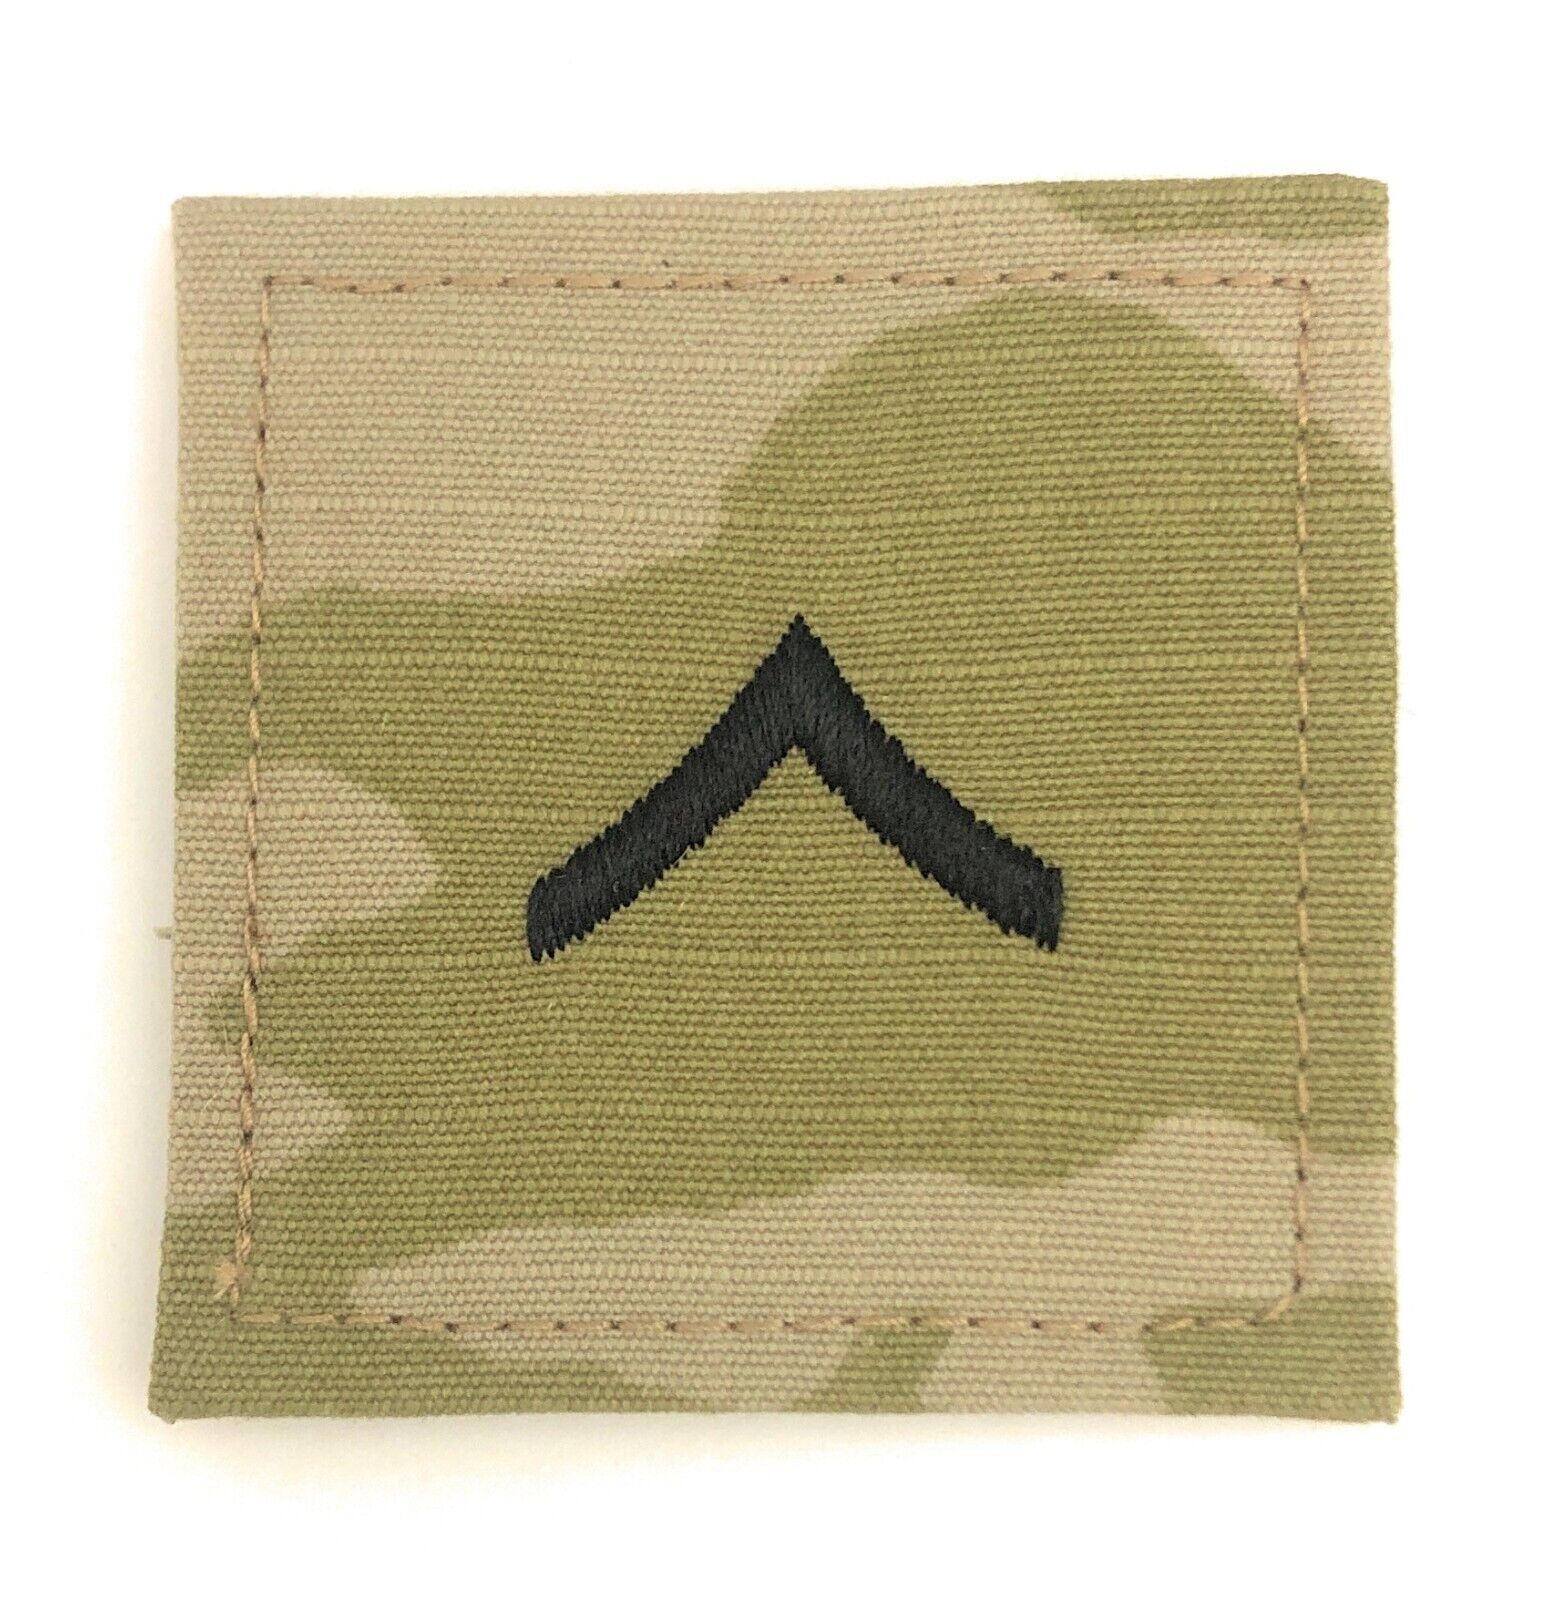 US Army OCP Rank 2x2 With Hook Fastener - E2 Private